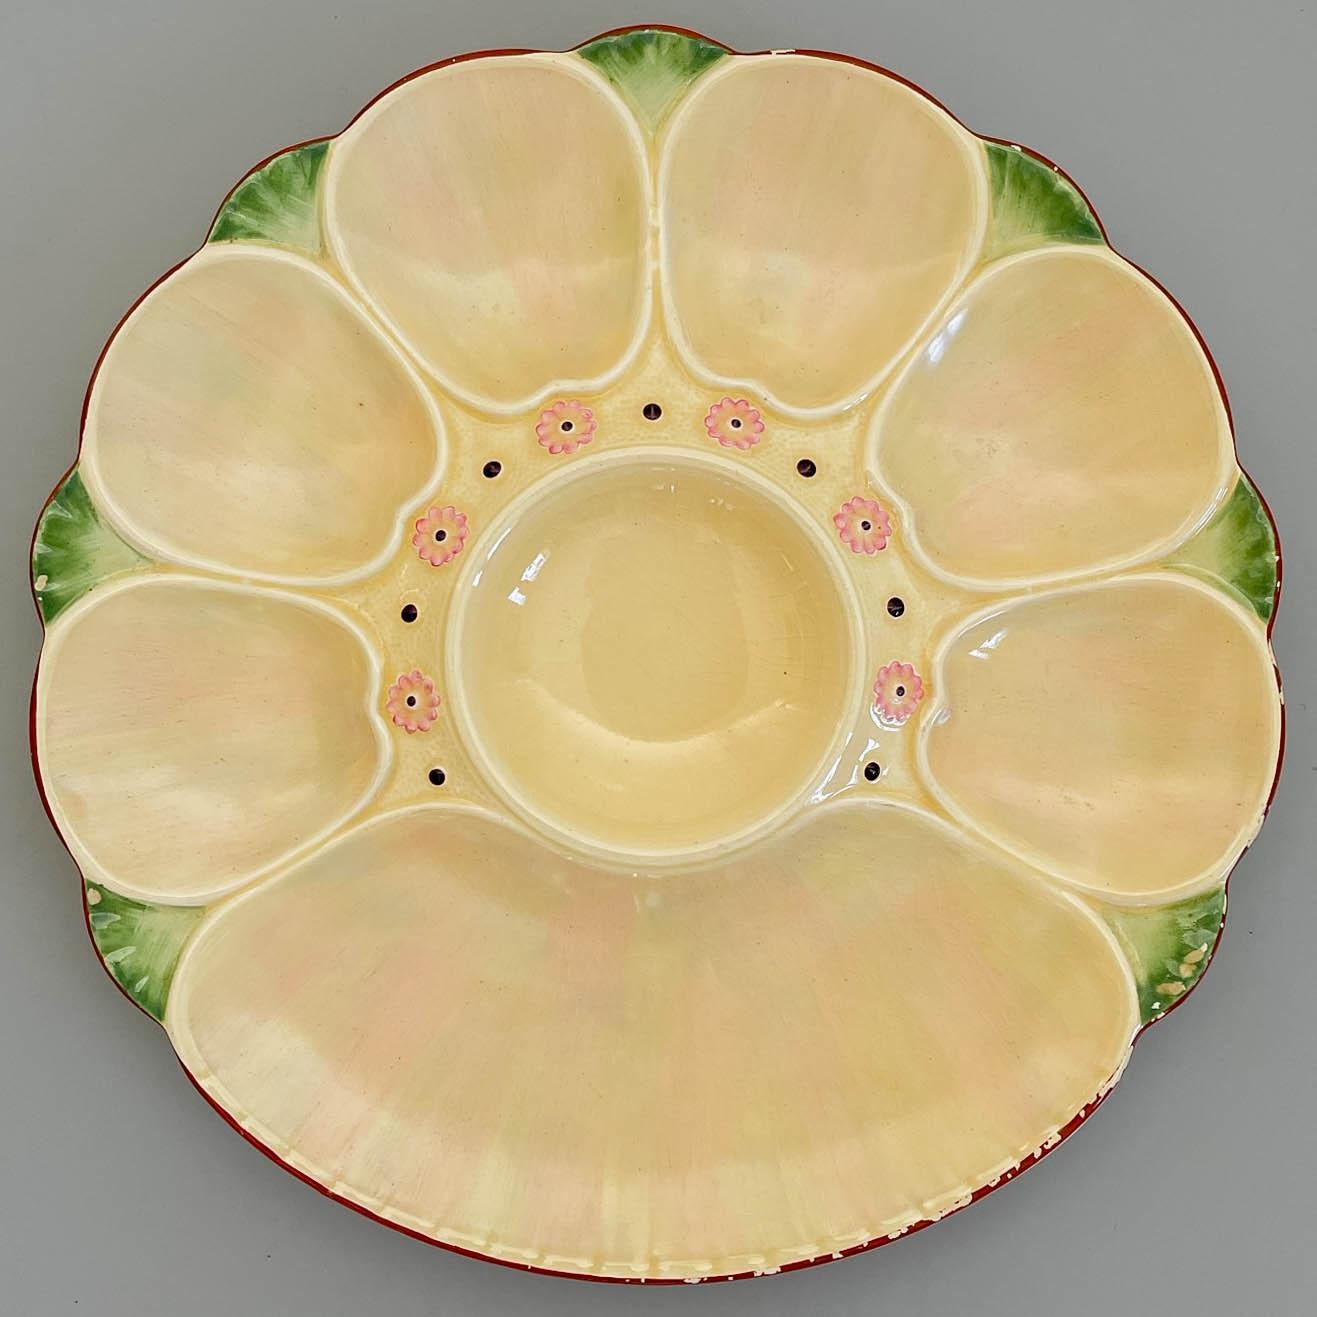 A pair of late 19th Century English Minton Majolica oyster plates with six oyster wells and a large well for crackers surrounding a center well for sauce. Luminous cream and pink glaze with pale green accents, small pink flowers and brown rim. Glaze